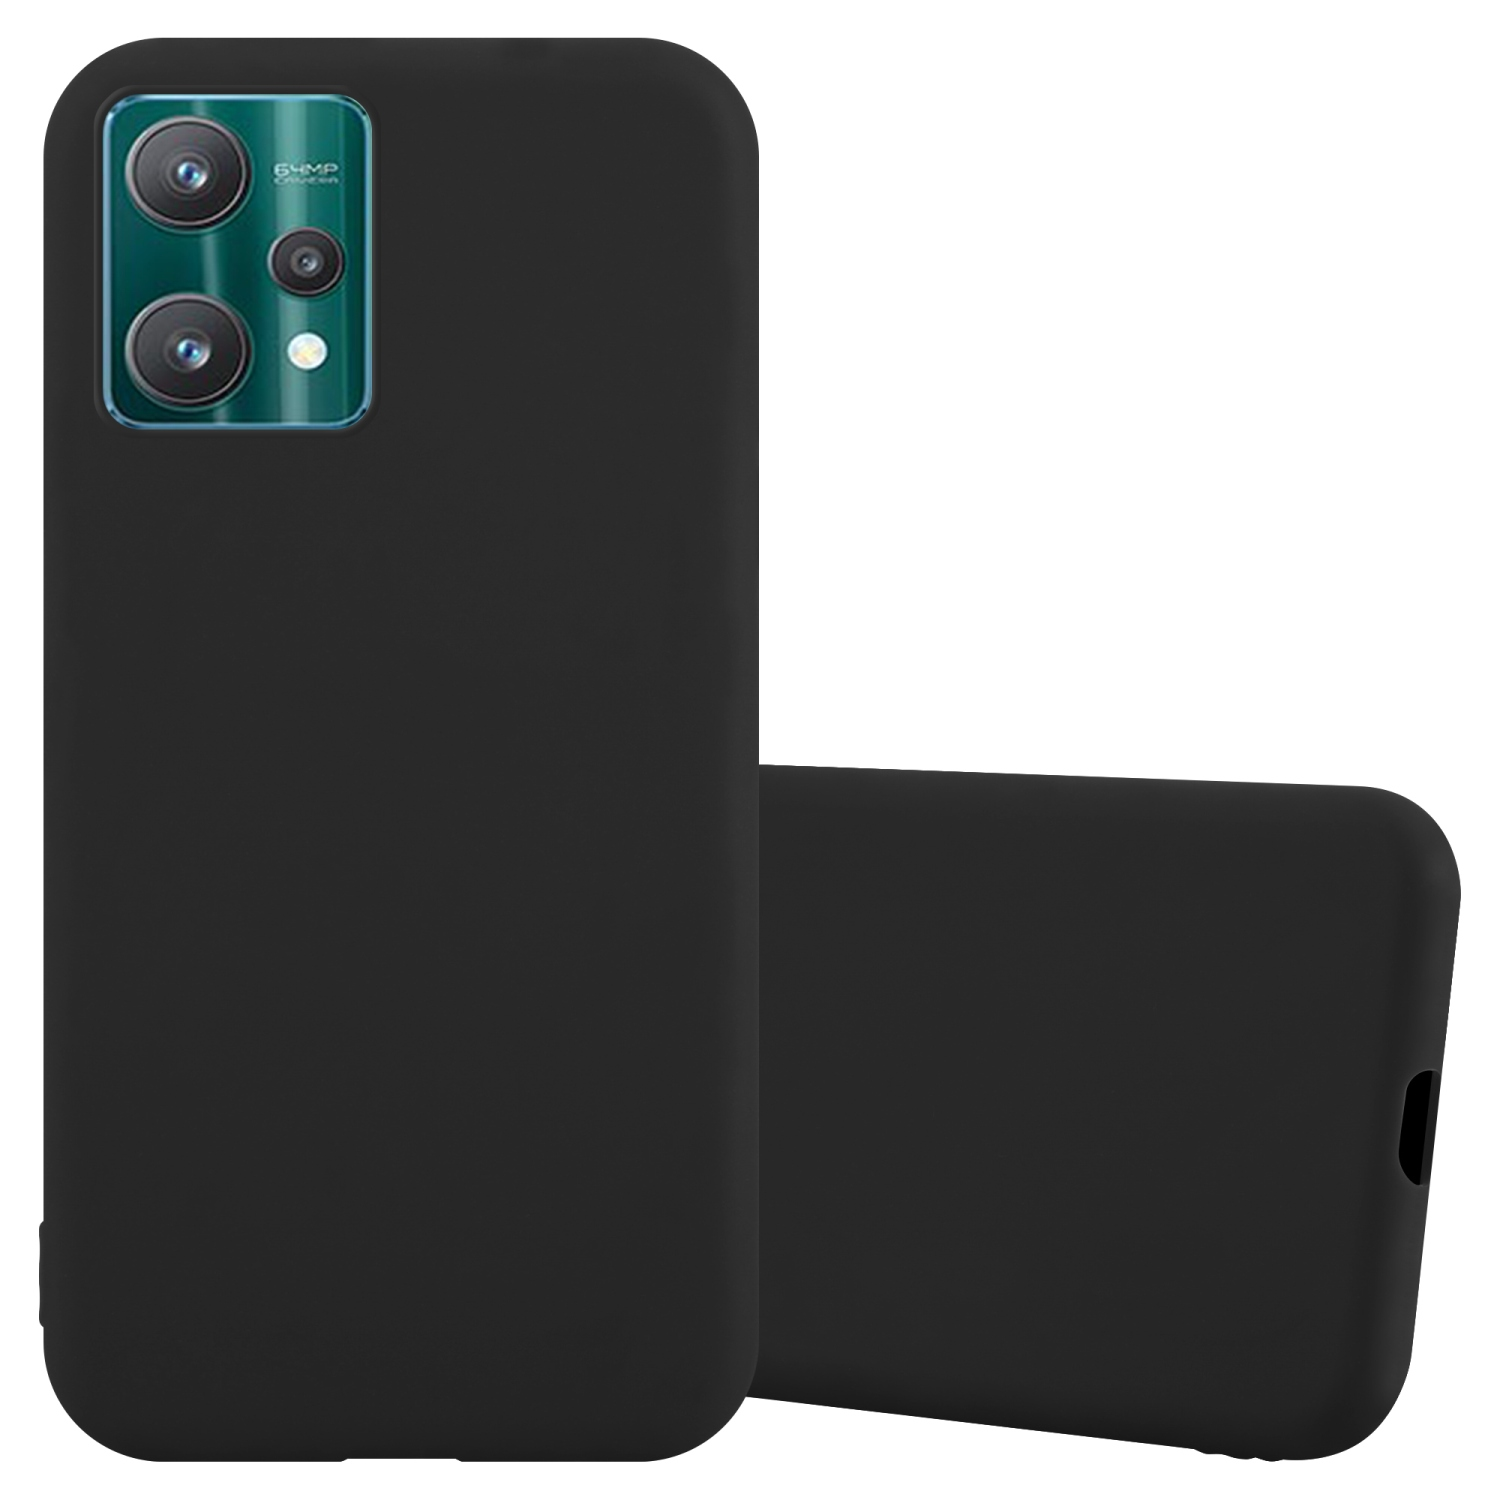 5G, 5G 9 Realme, / Backcover, PRO SCHWARZ / Style, 9 TPU / OnePlus V25 CE im LITE / Candy Nord CANDY 2 Hülle CADORABO Q5